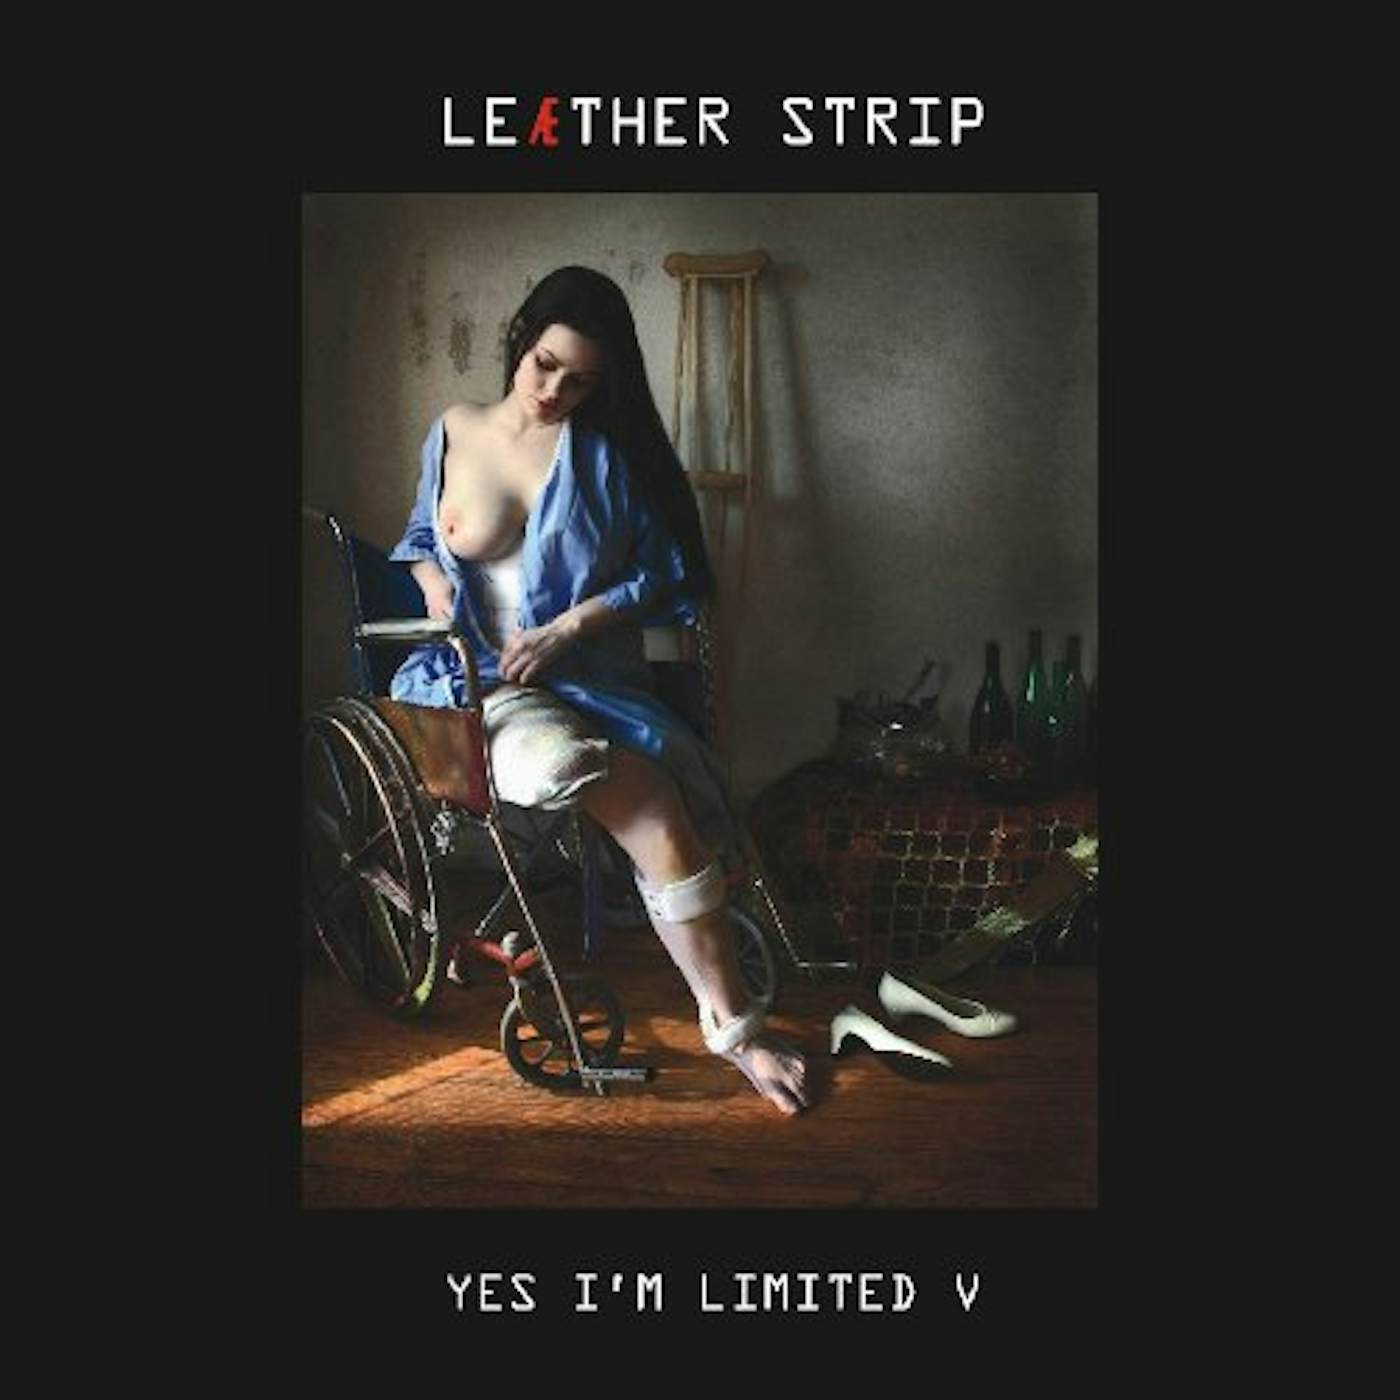 Leaether Strip YES I'M LIMITED 5 CD